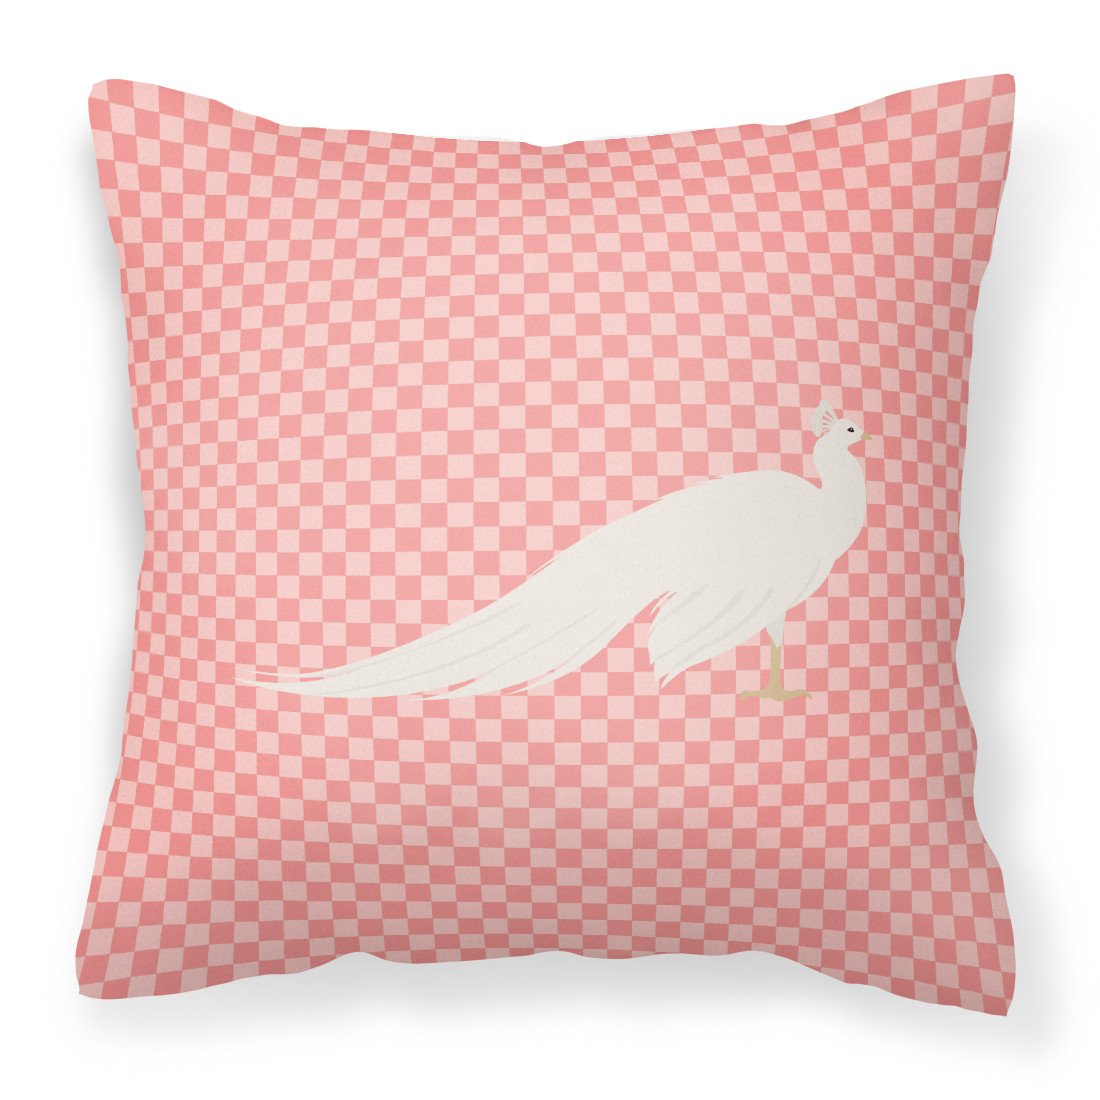 White Peacock Peafowl Pink Check Fabric Decorative Pillow BB7926PW1818 by Caroline's Treasures